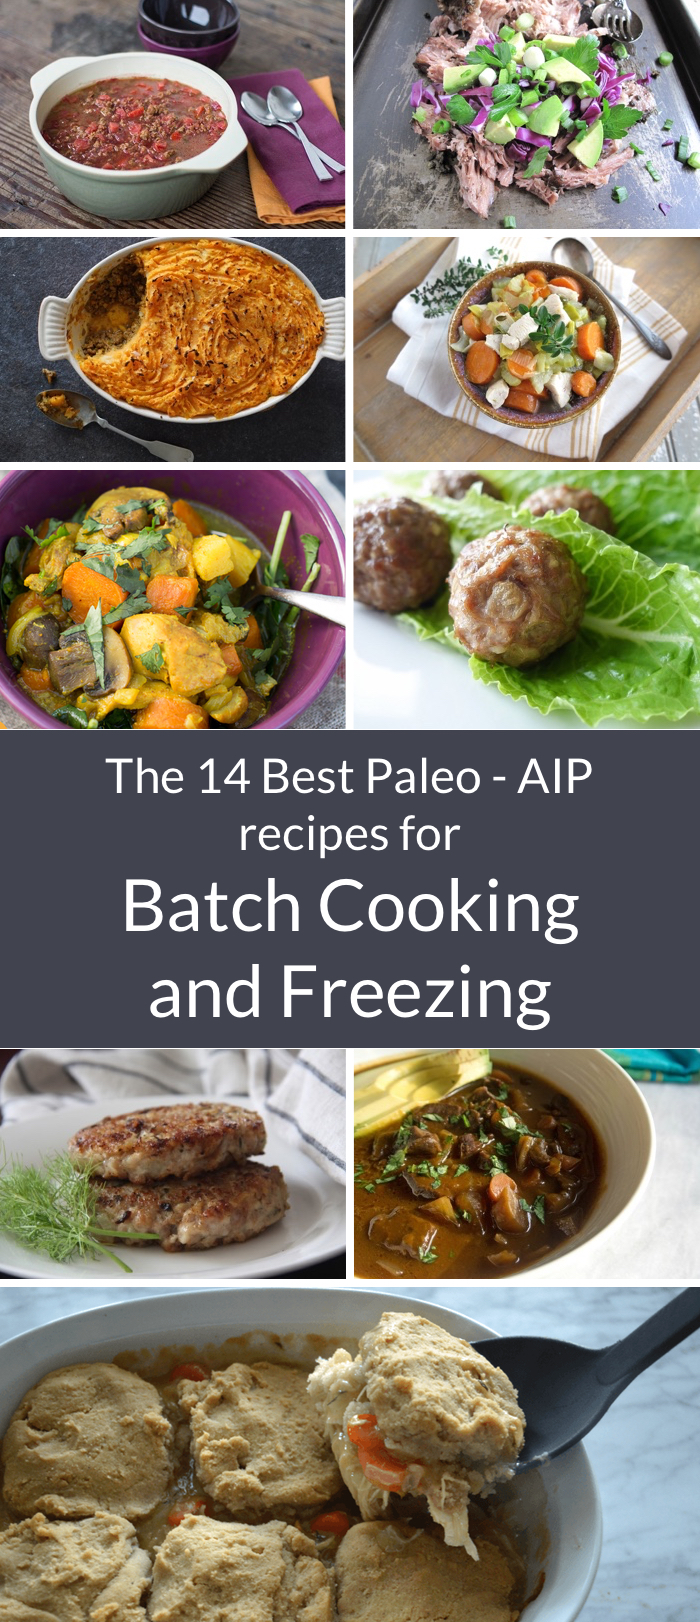 Top 14 AIP Recipes for Batch Cooking and Freezing